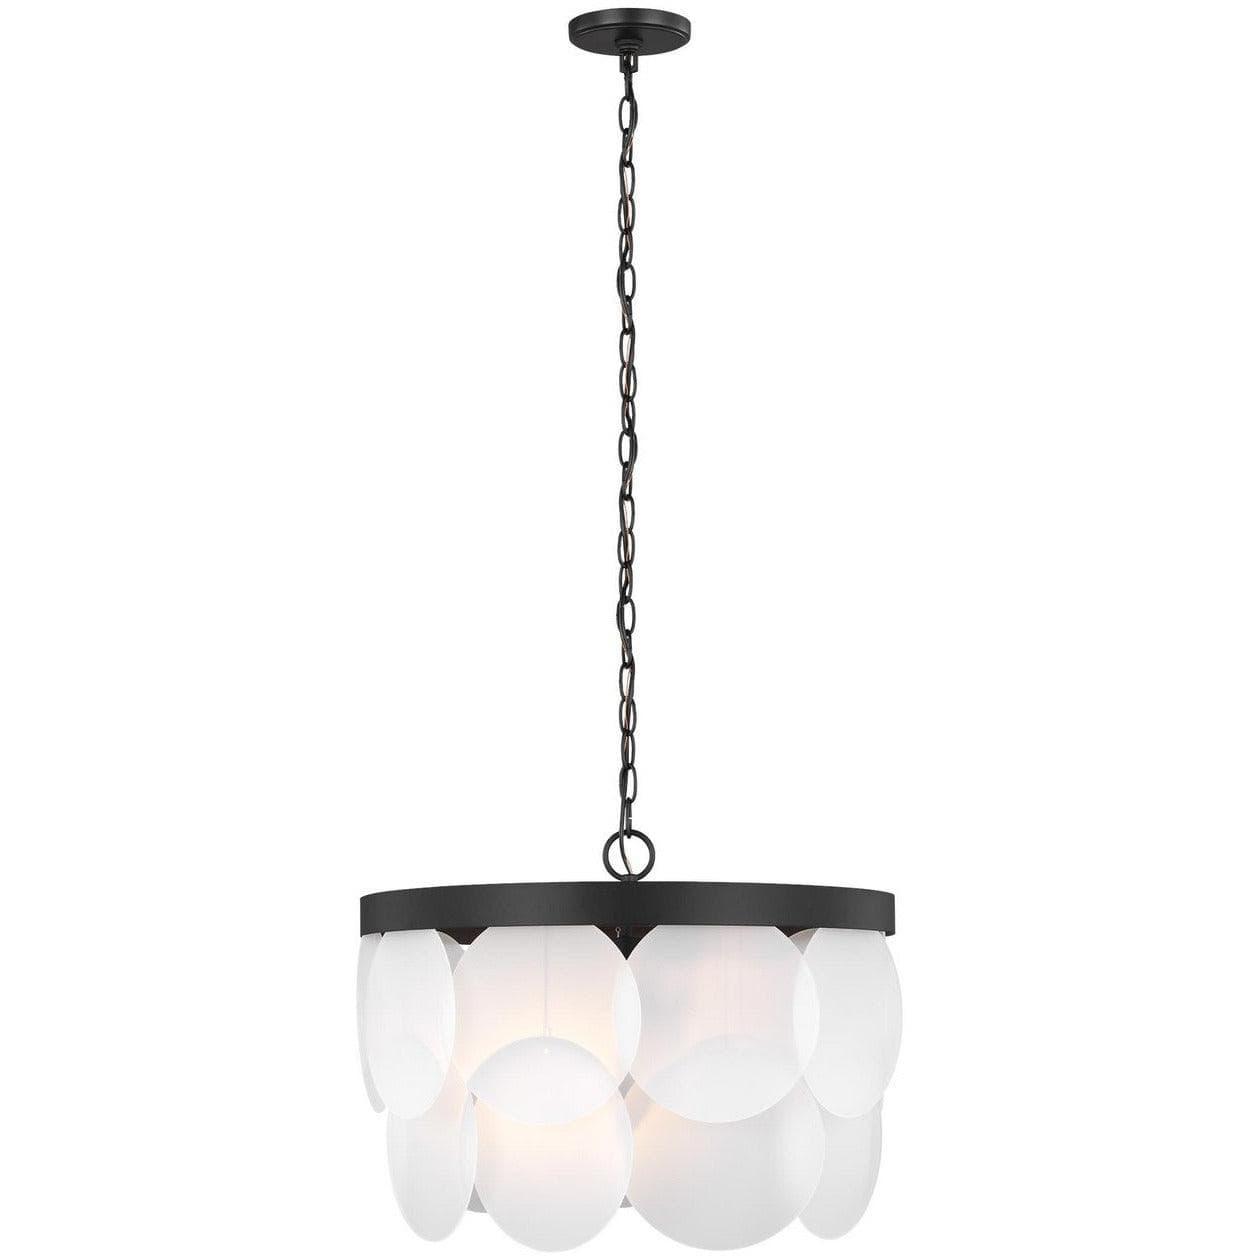 Visual Comfort Studio Collection LXW1031BBS at Showroom Lighting  Contemporary,Modern